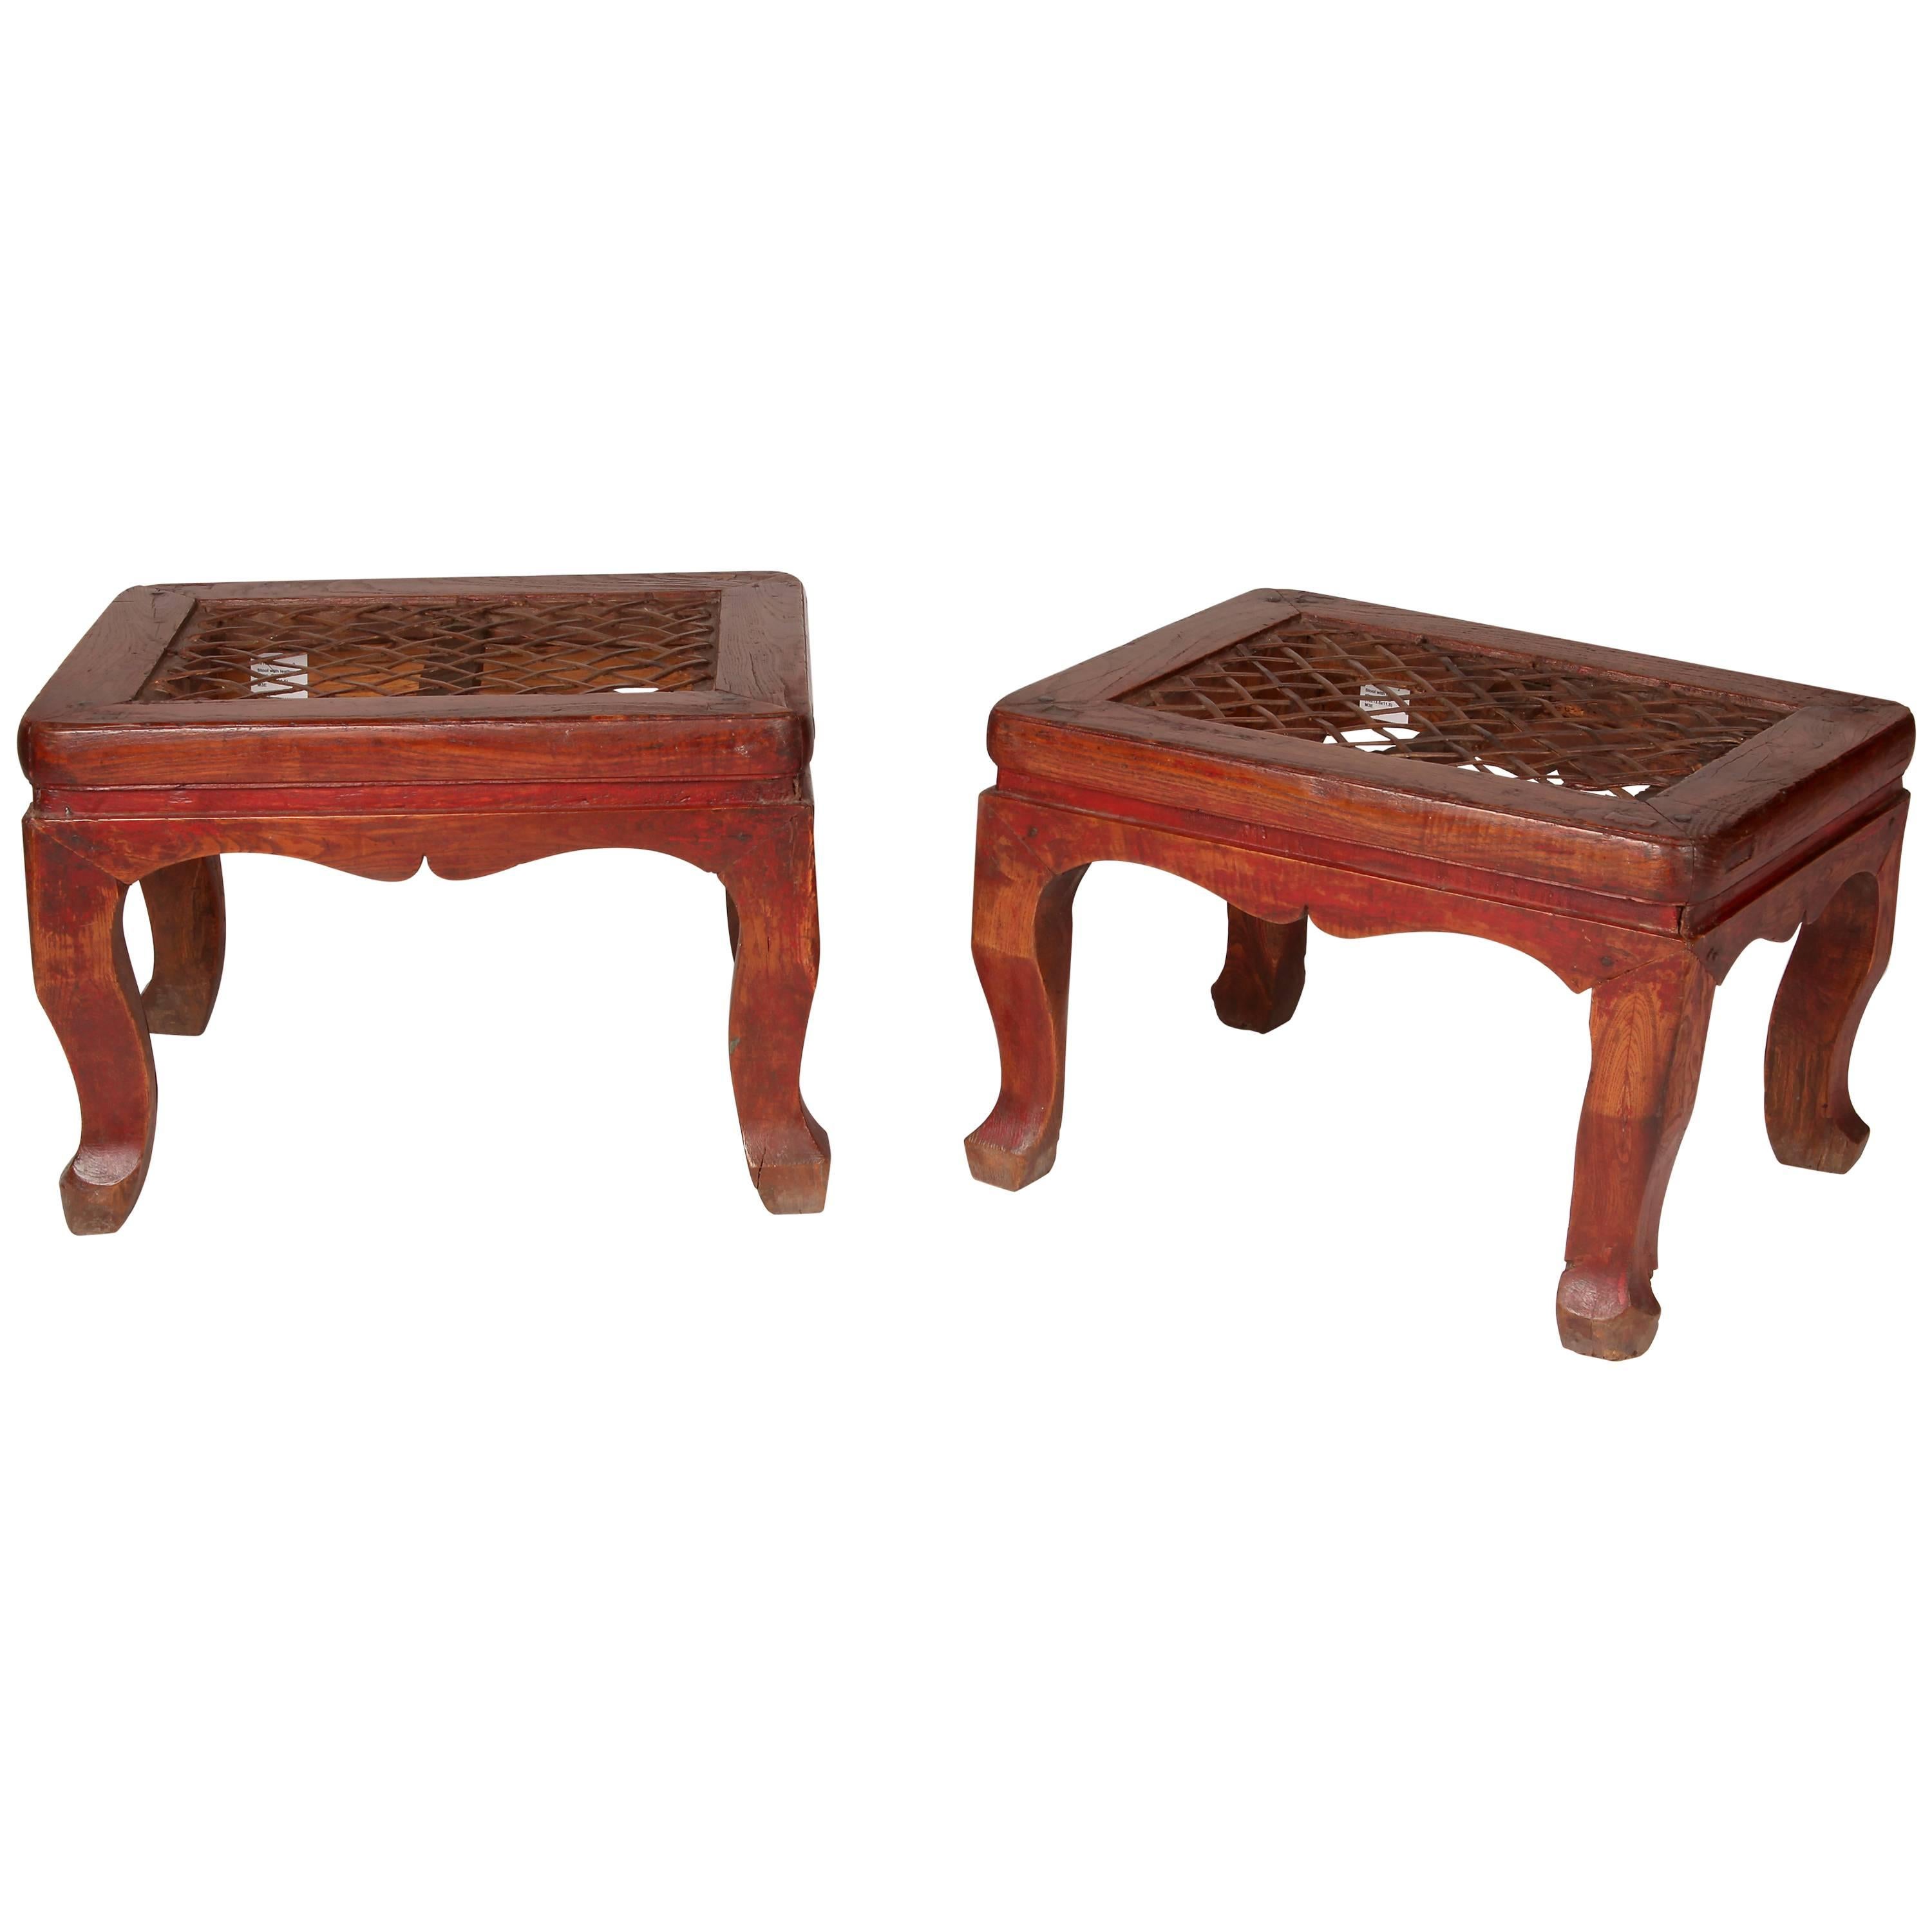 Chinese Rectangular Stools with Woven Seat and Cabriole Legs